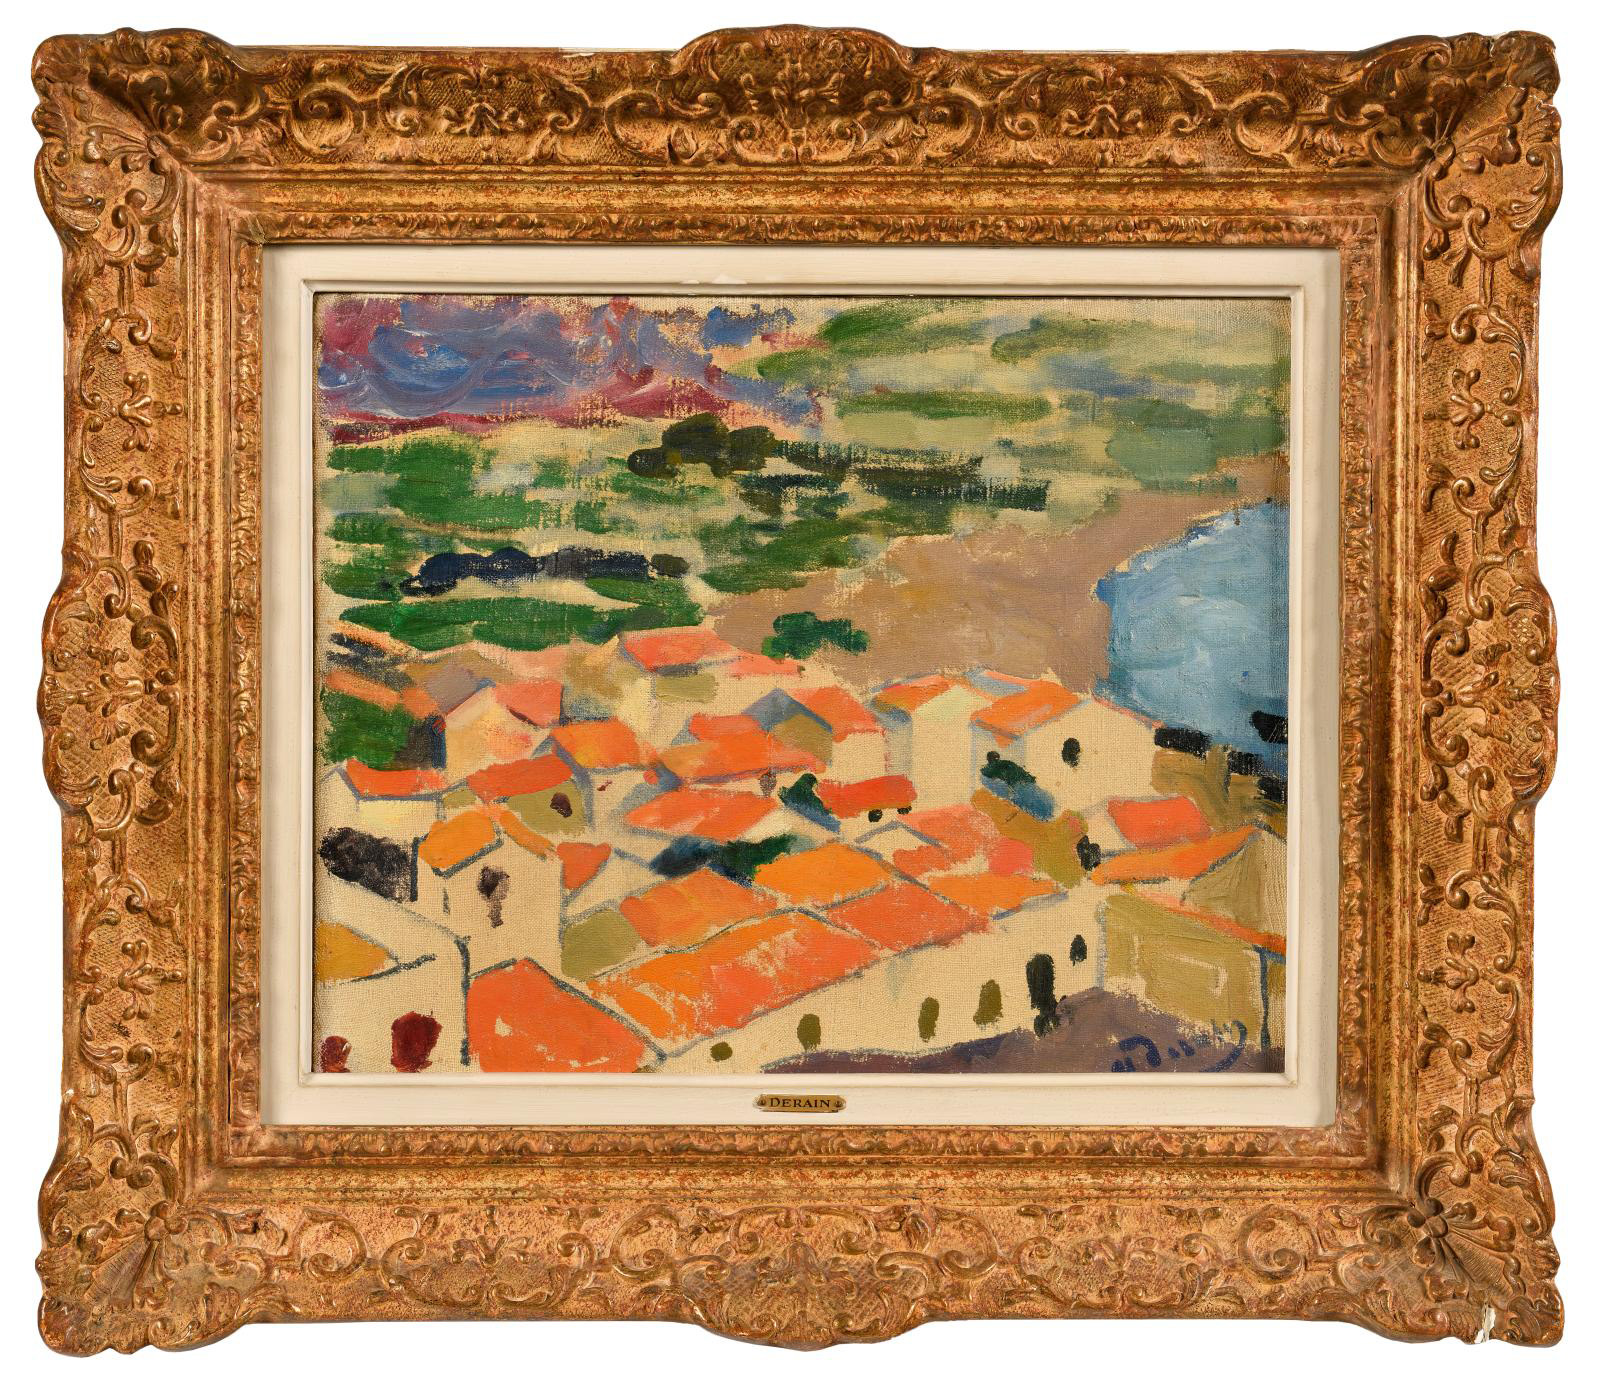  André Derain in Collioure: A Rediscovered Painting Hits the Market for the First Time